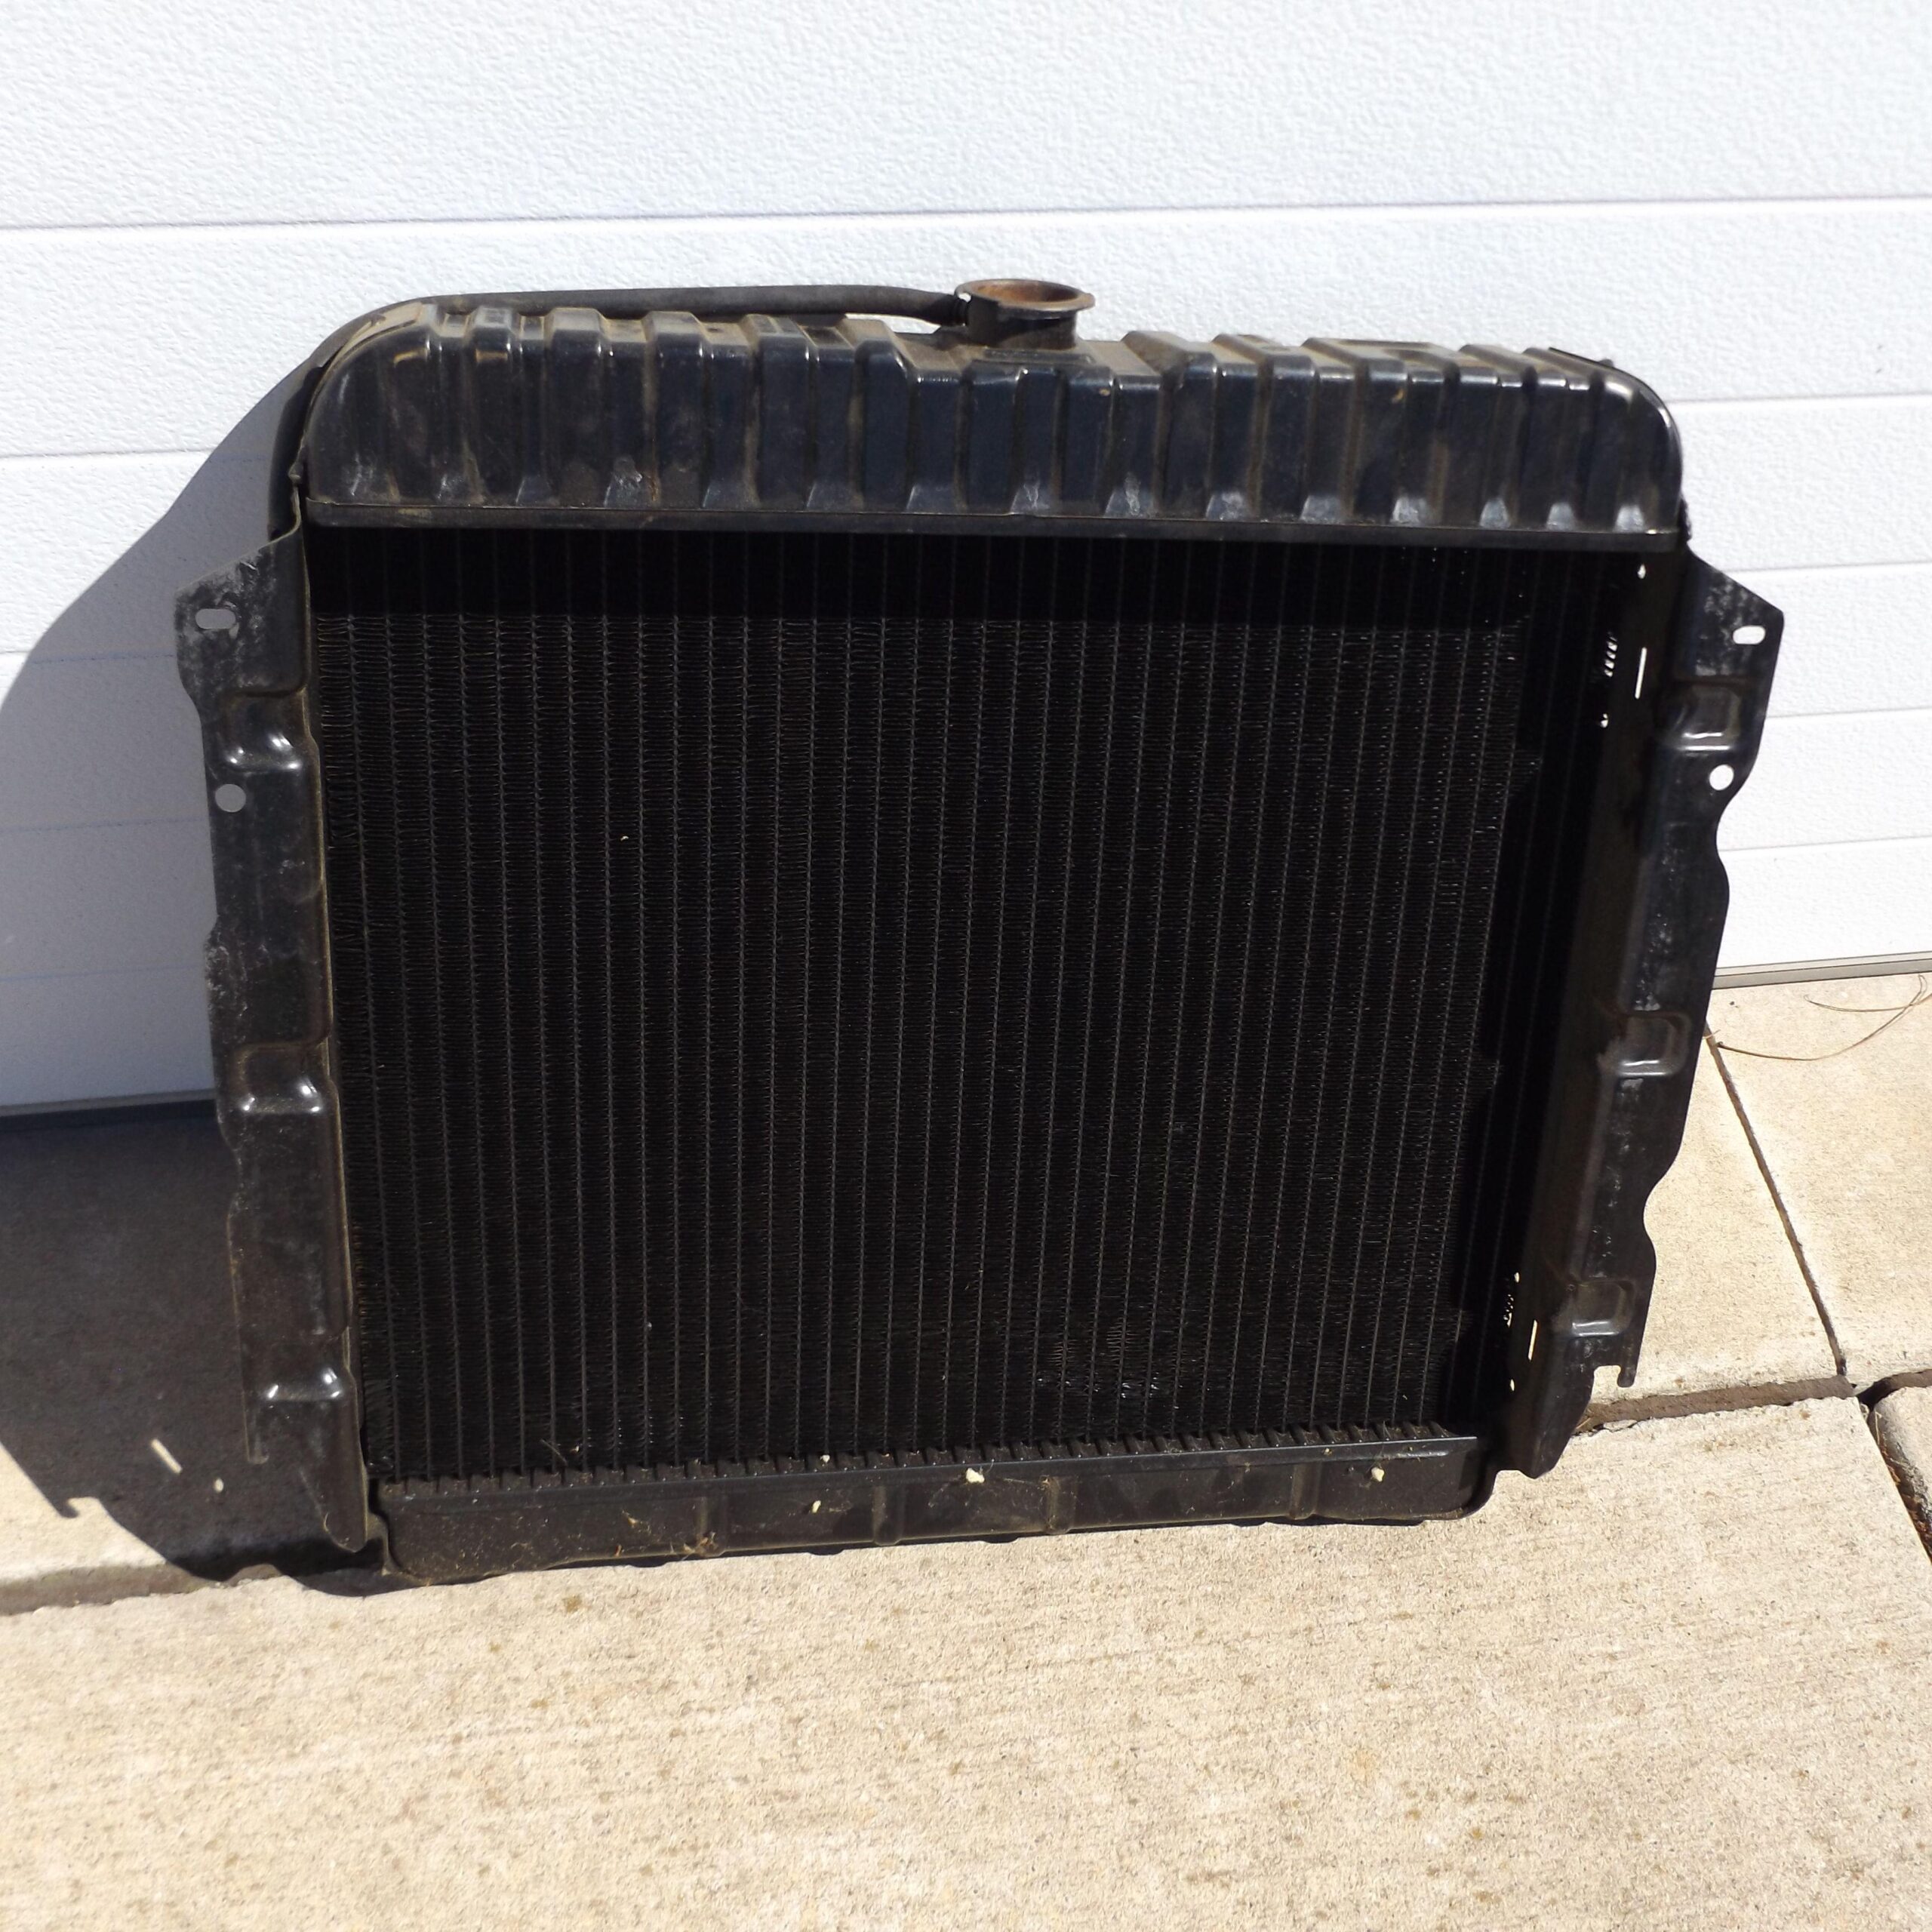 Radiator Core# 3736935 - 22 - 318-360 - Dodge - Plymouth - Truck - Van -  1974-77 - NOS - SHIPS FREE TO LOWER 48